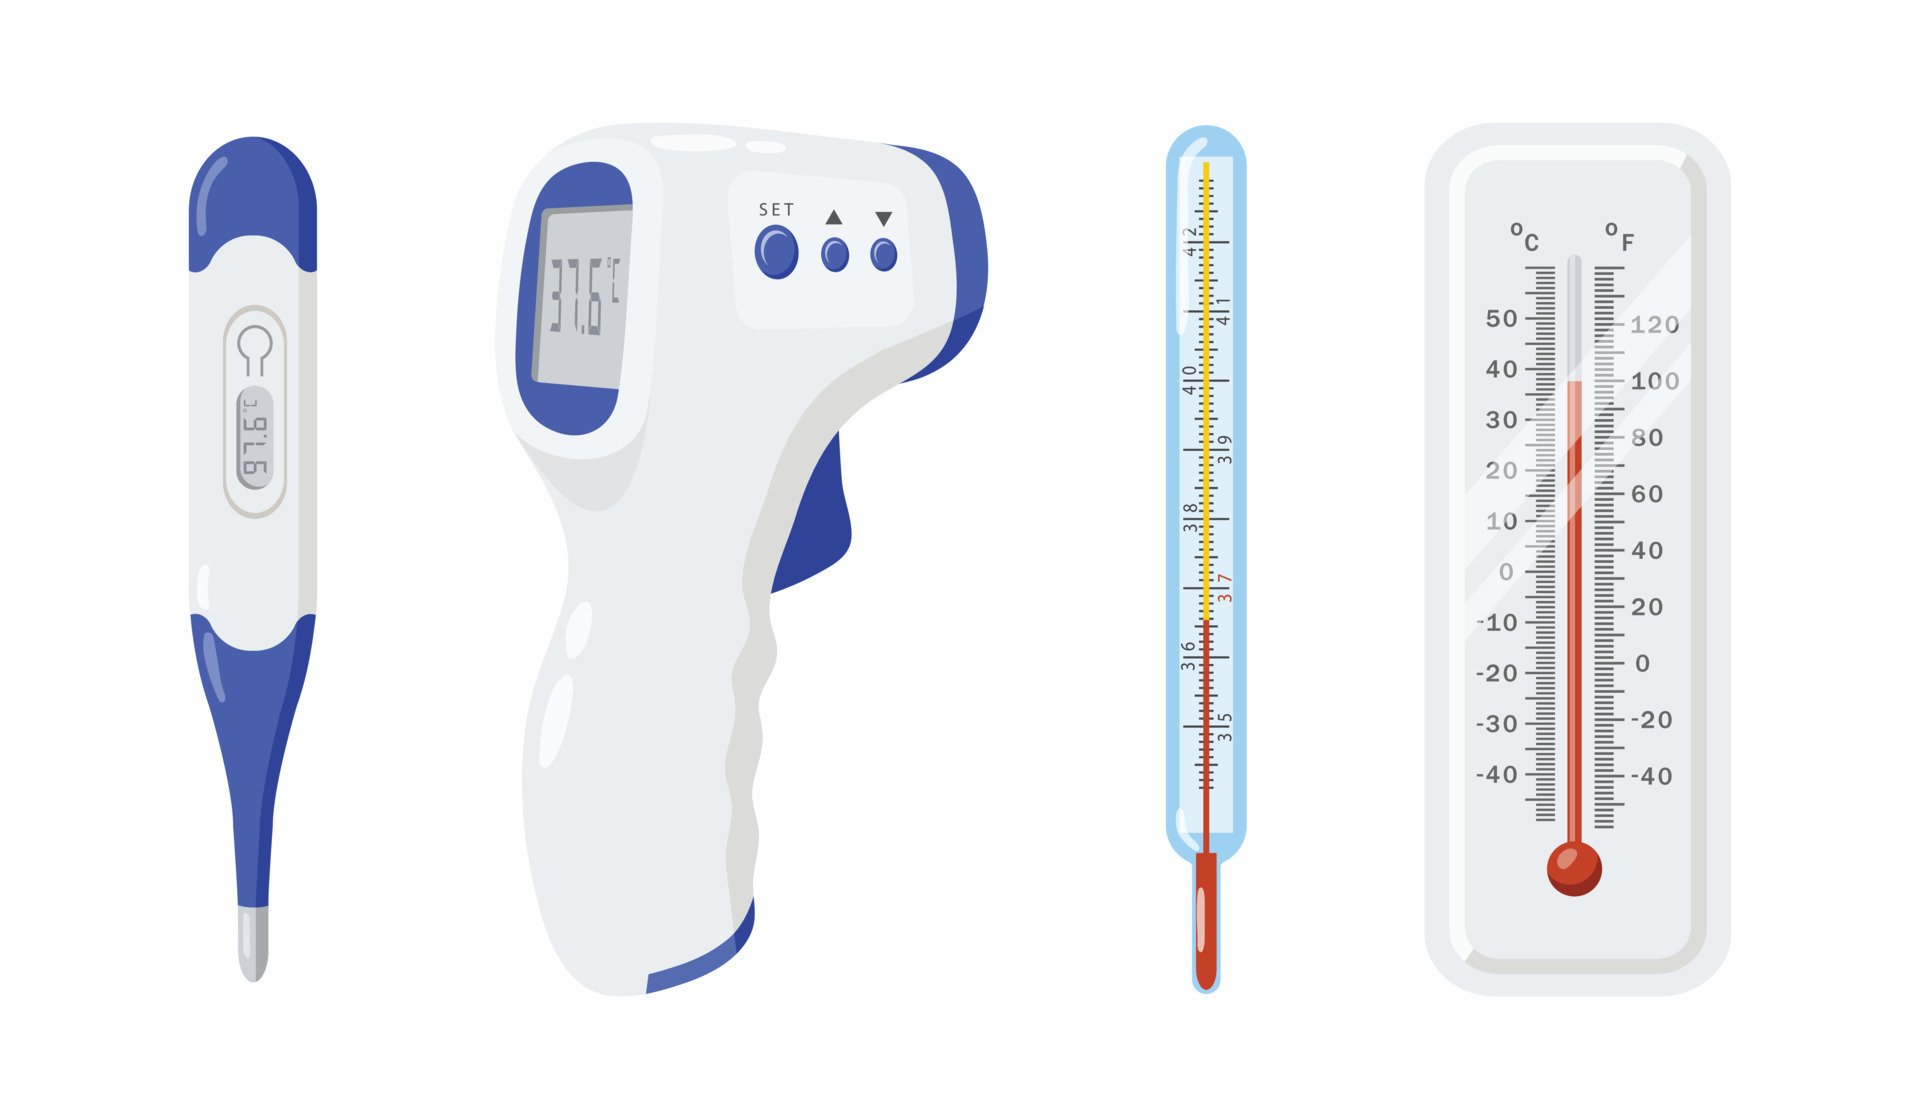 https://static.vecteezy.com/system/resources/previews/014/194/151/original/various-types-of-thermometer-tools-for-measuring-body-temperature-vector.jpg